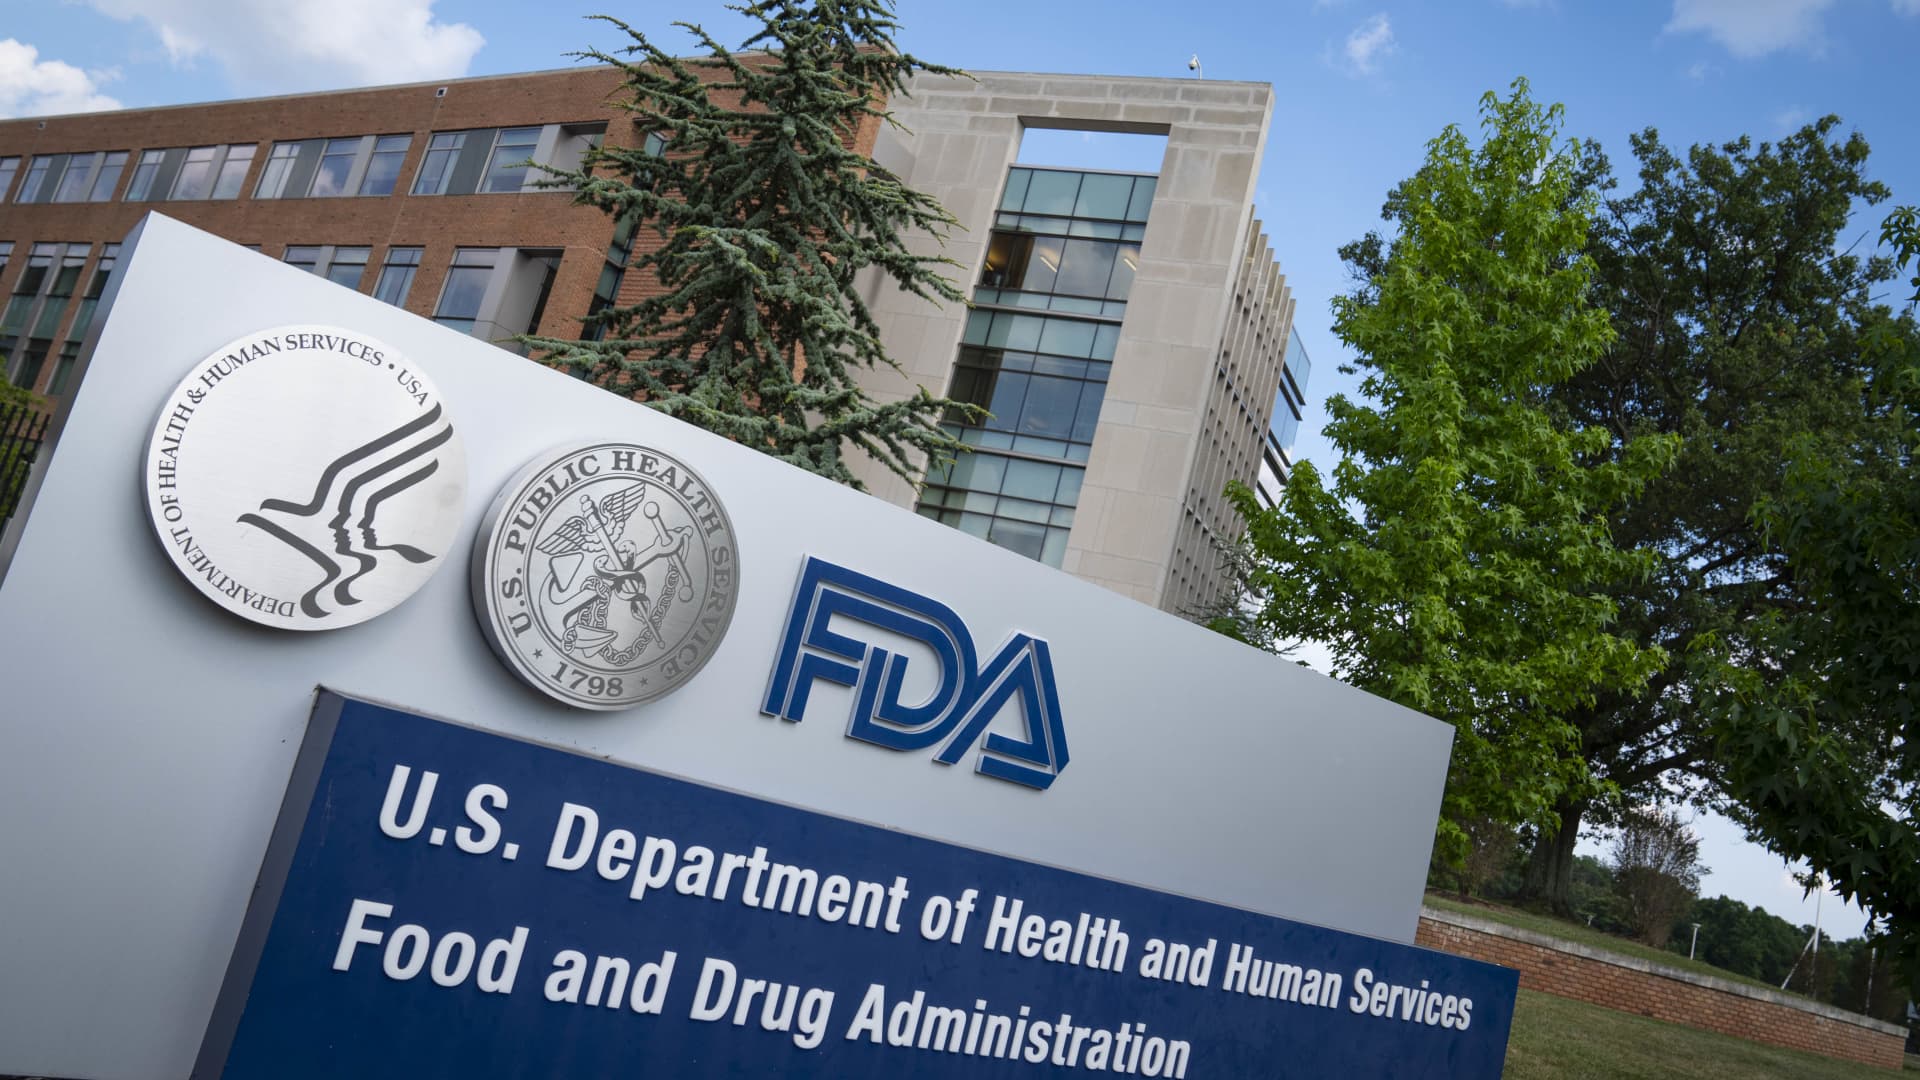 fda-official-overseeing-food-policy-and-response-to-resign-in-wake-of-baby-formula-shortage